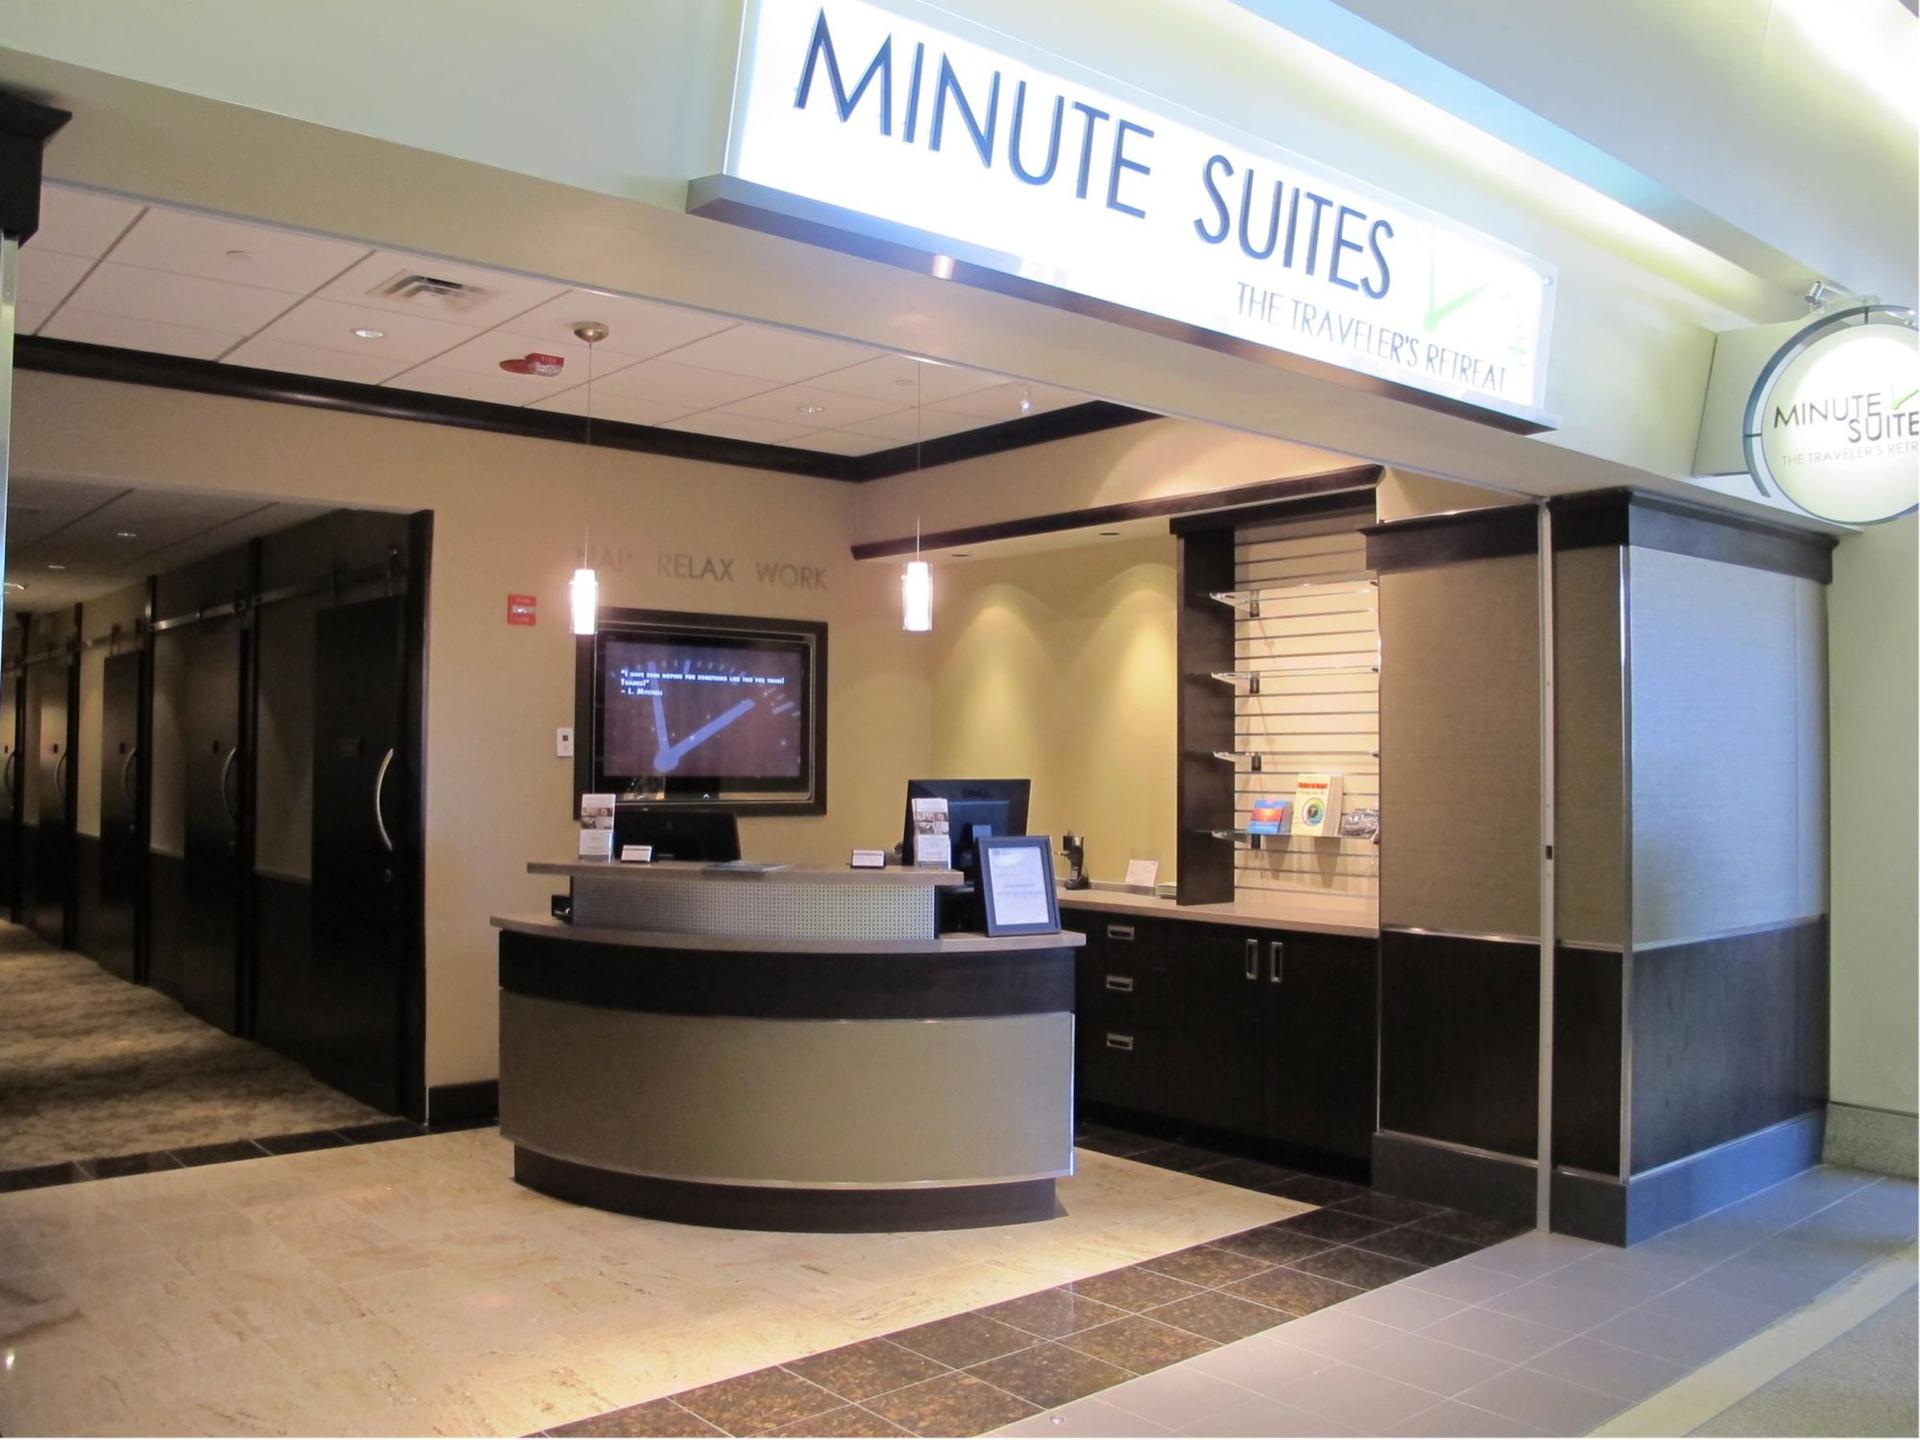 Minute Suites image 13 of 41